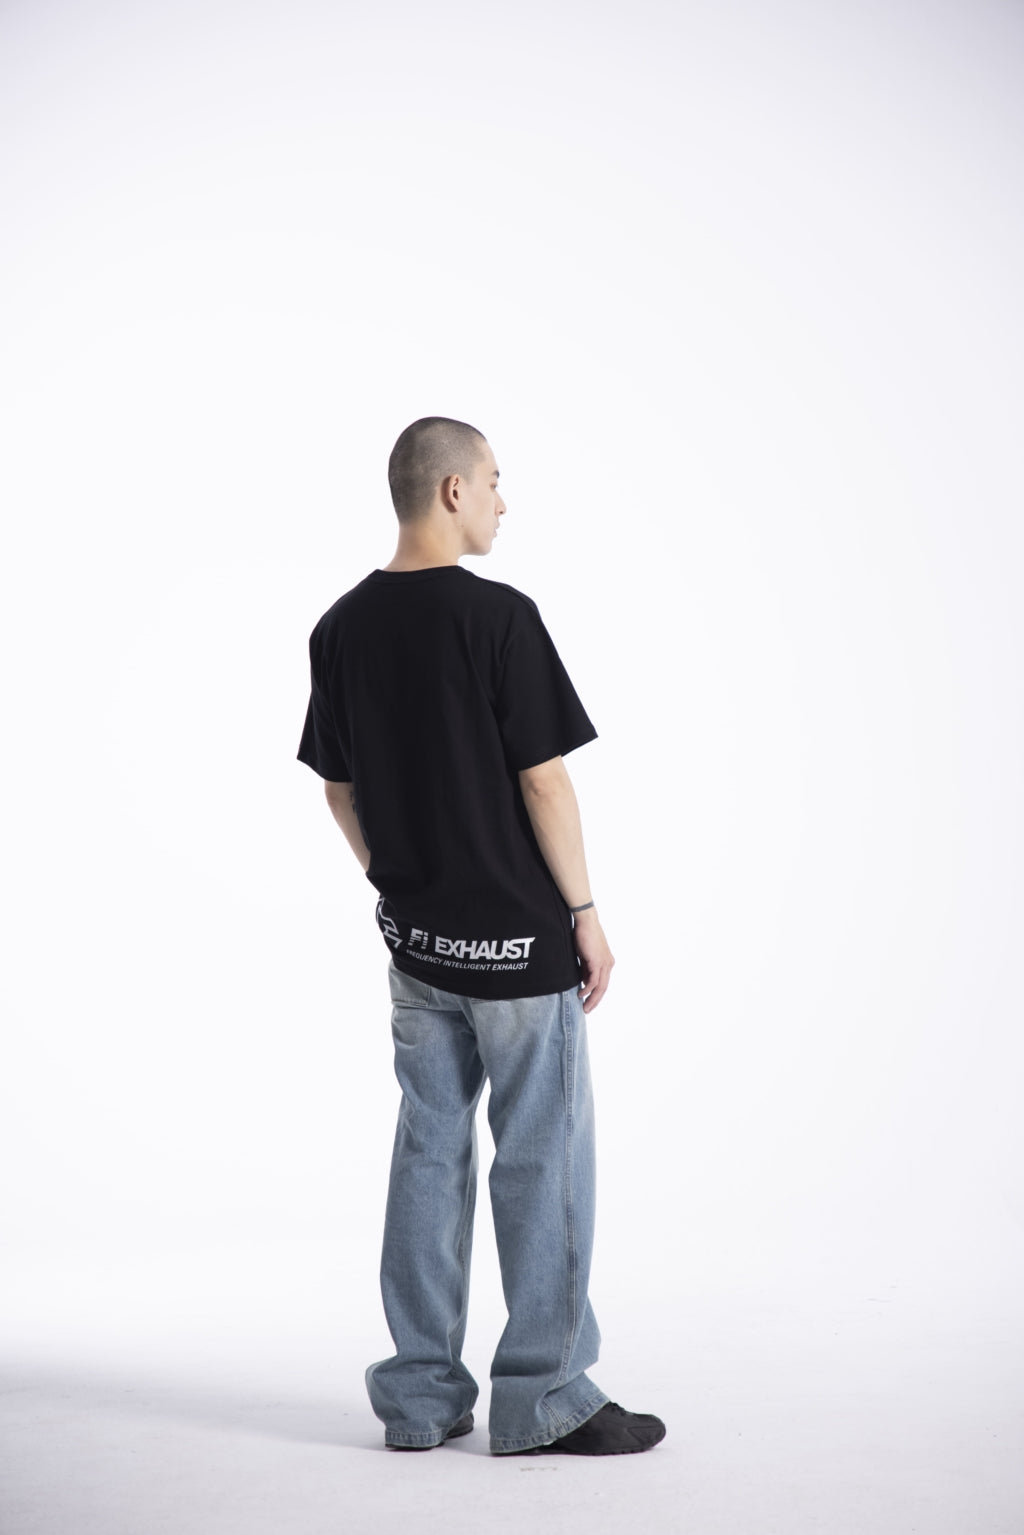 "Reflected Wave (Silver)" Black Heavyweight Crew Neck T-Shirt [Limited Ed.]